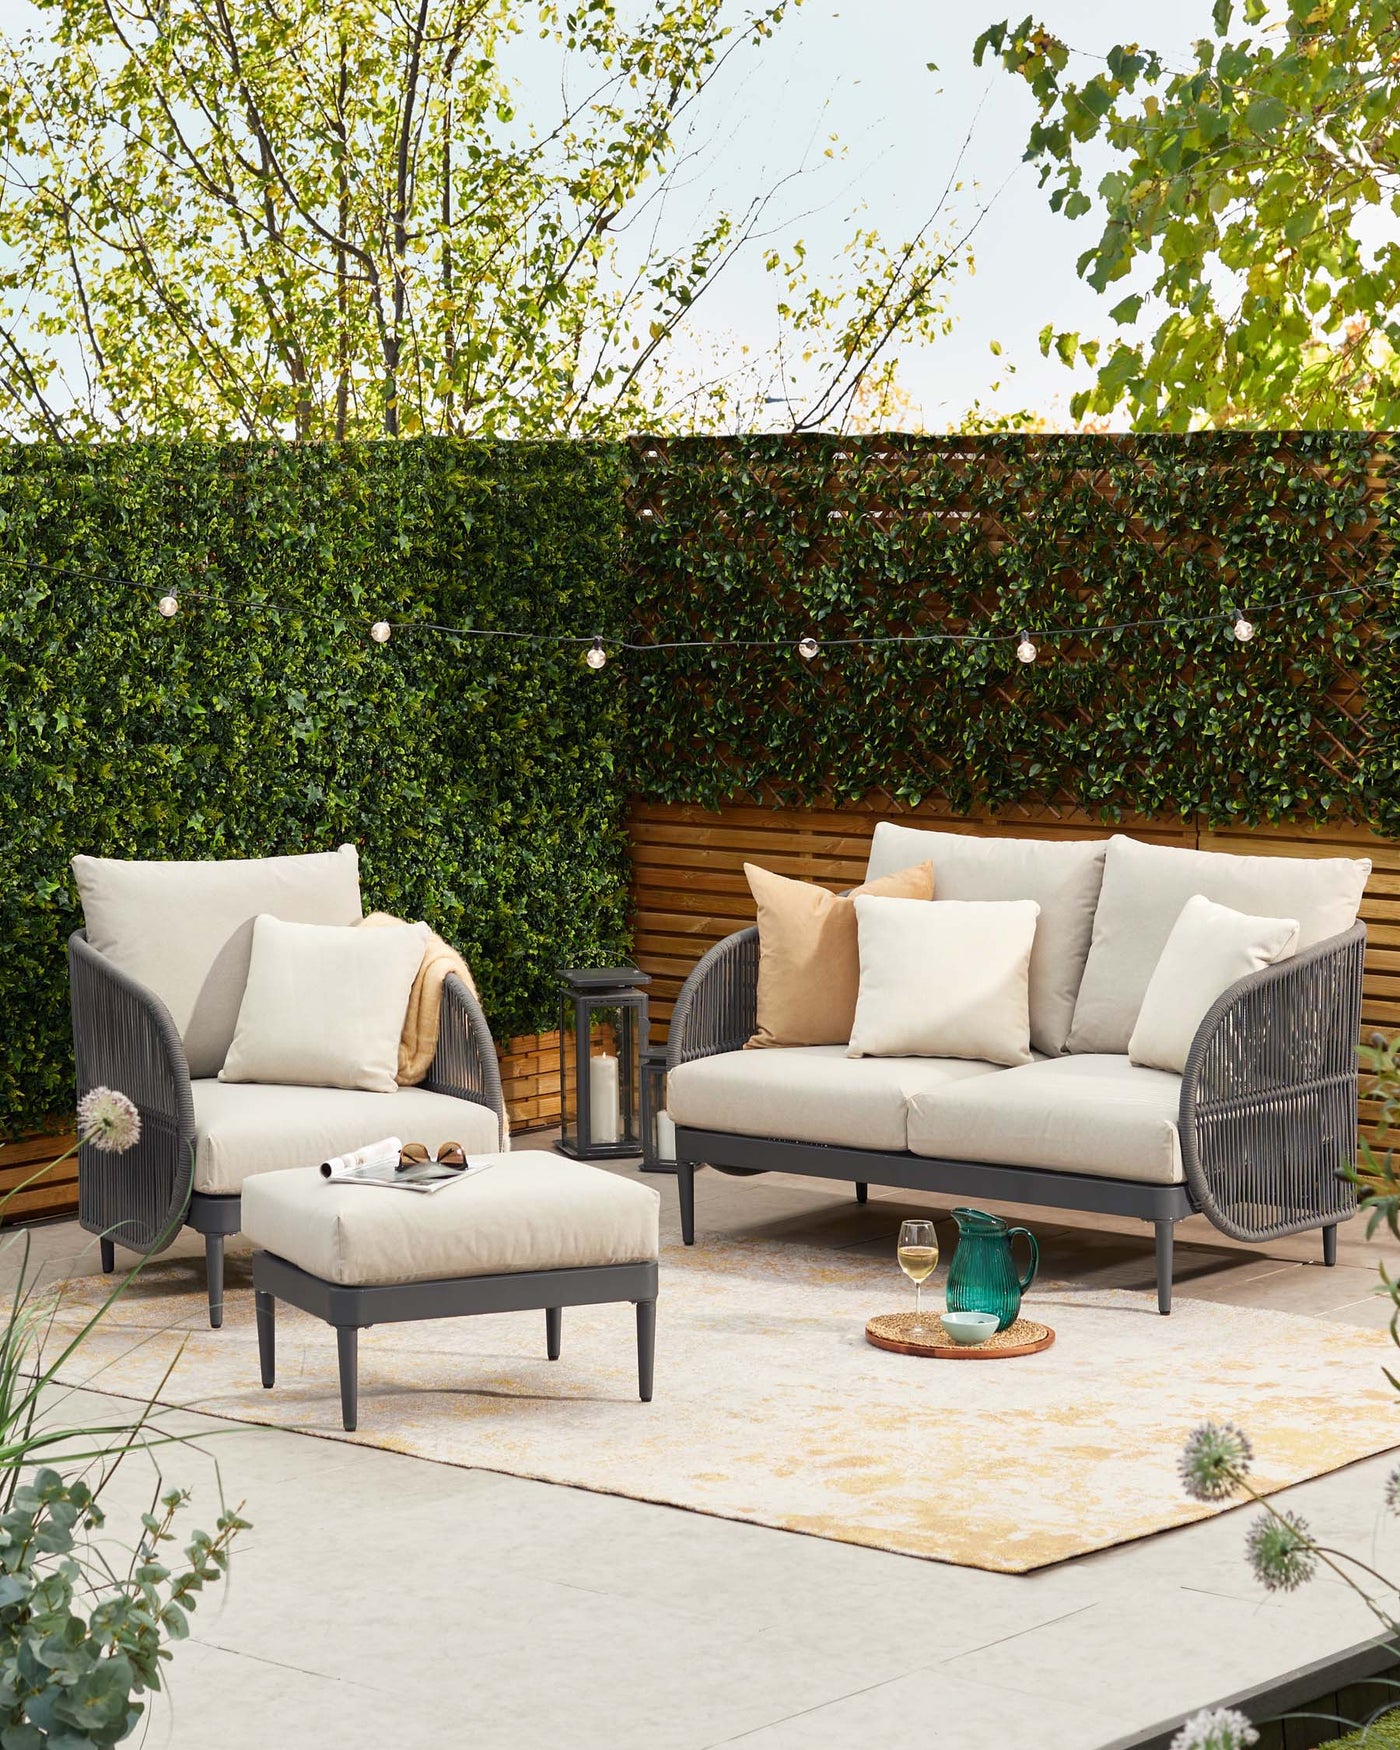 Outdoor patio furniture set featuring a three-seat sofa with plush cushions and two elegant high-back lounge chairs, complemented by a matching rectangular ottoman. All pieces are constructed with a grey metal frame paired with soft, light-toned upholstery. A small, round side table with a wooden top is positioned beside one of the chairs. The furniture is arranged on a textured off-white outdoor rug.